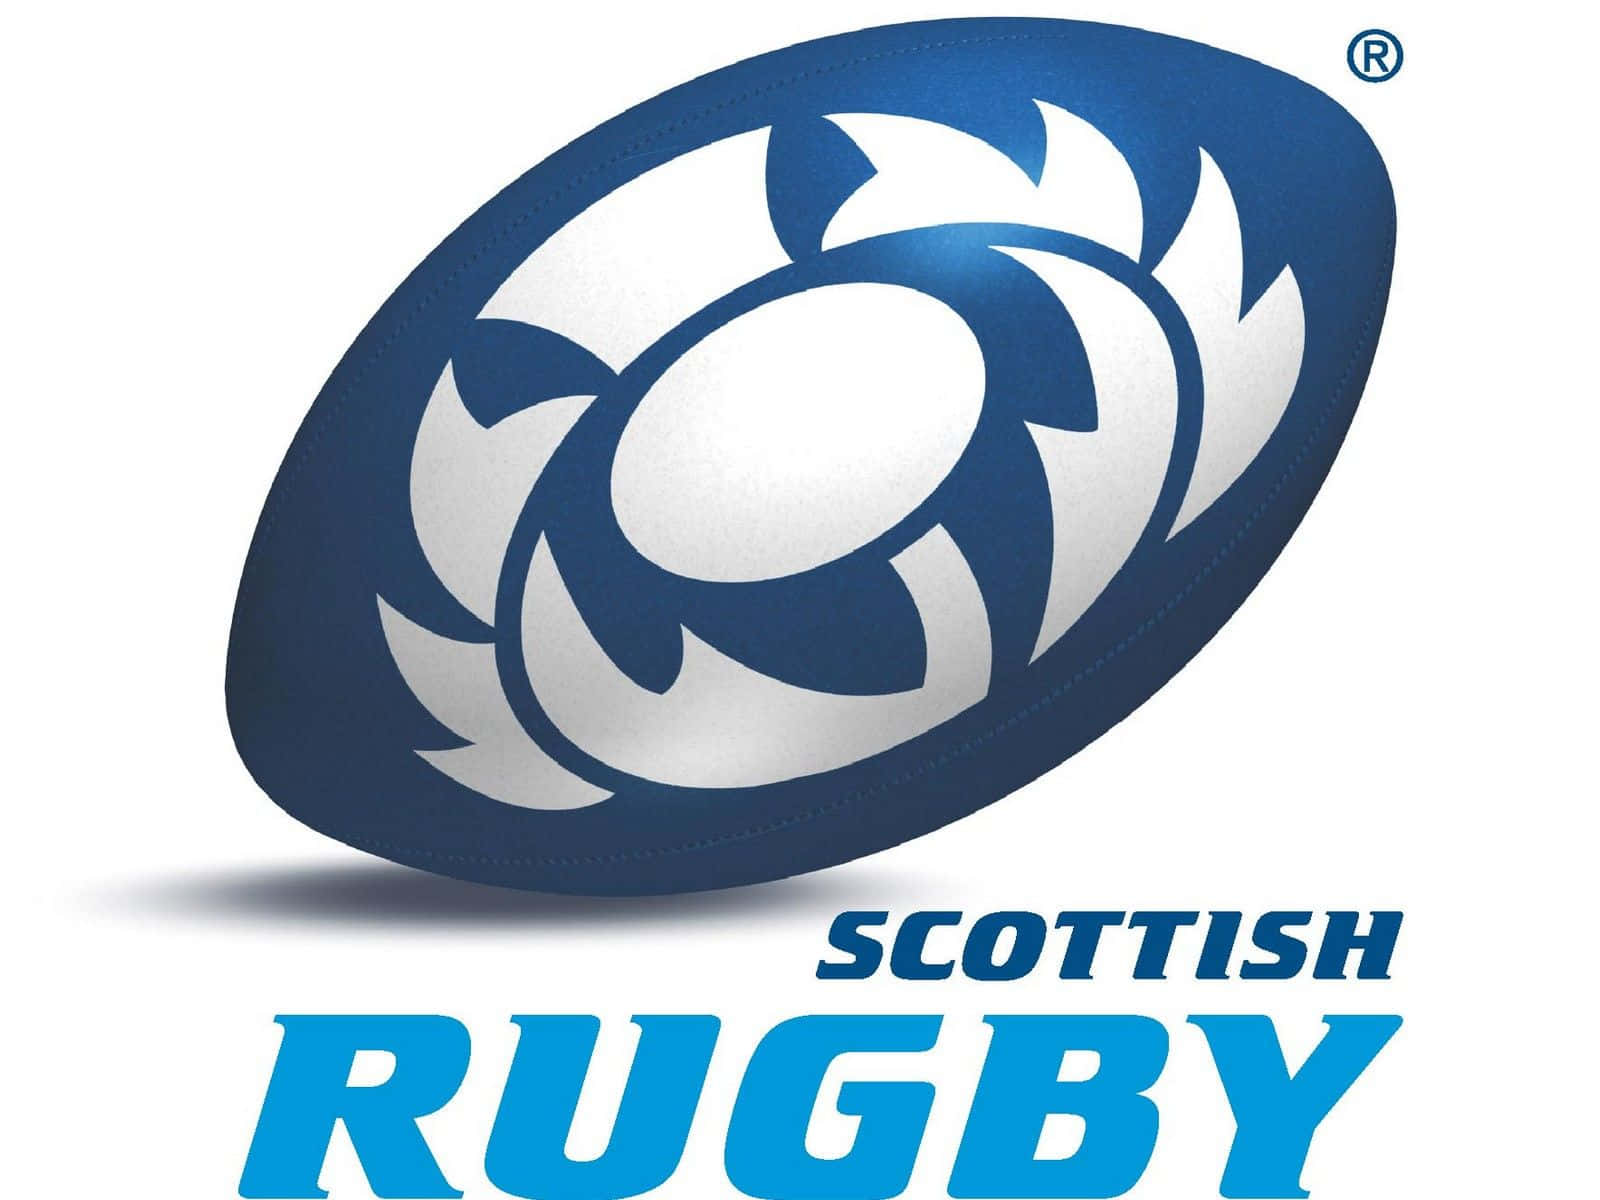 Scotland Rugby Team in Action Wallpaper